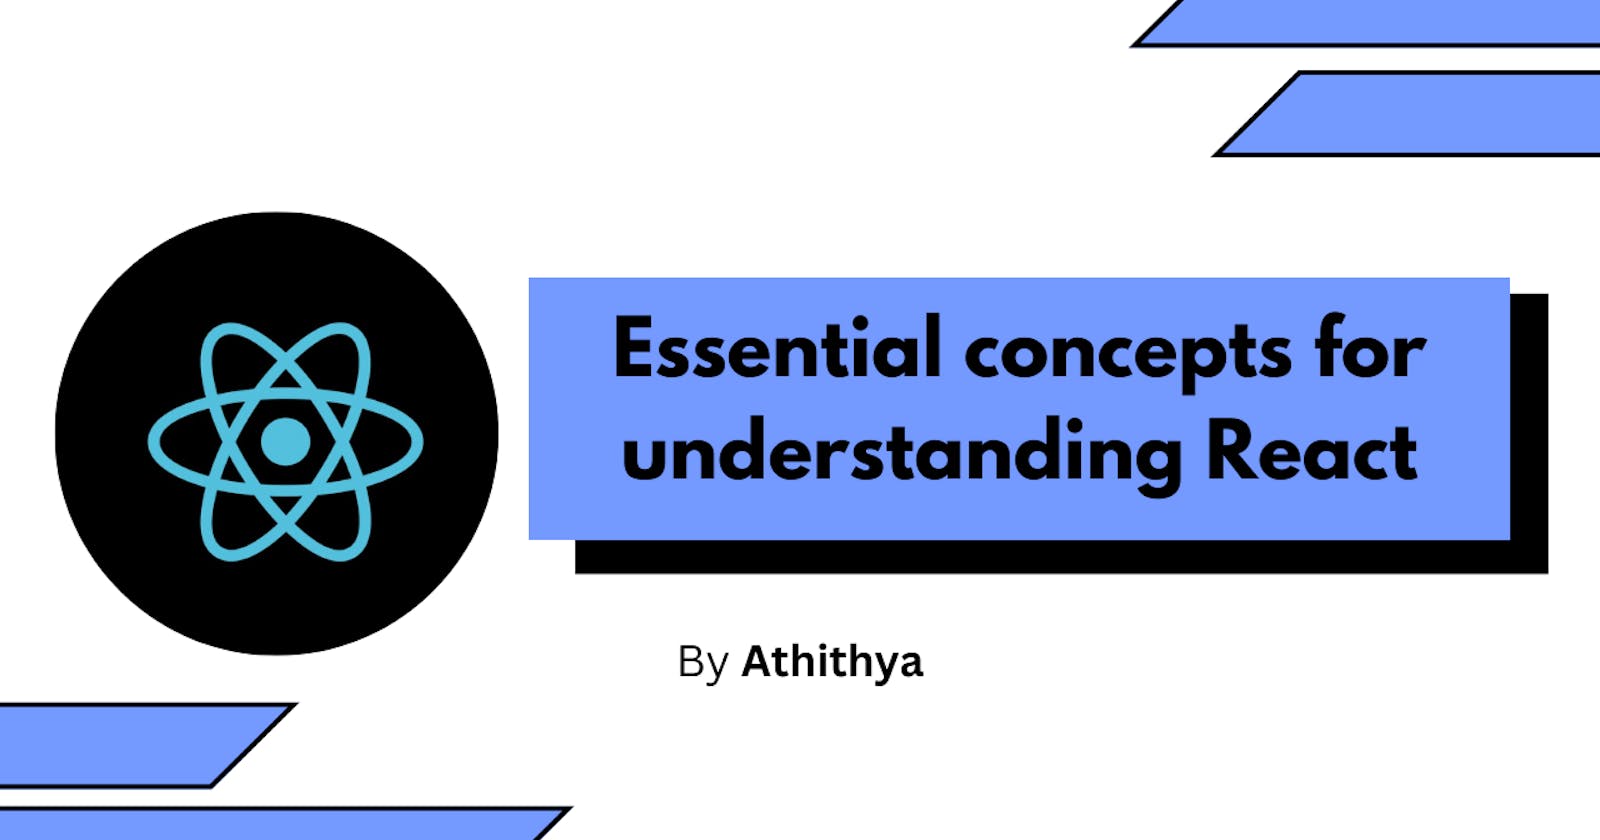 Essential concepts for understanding React